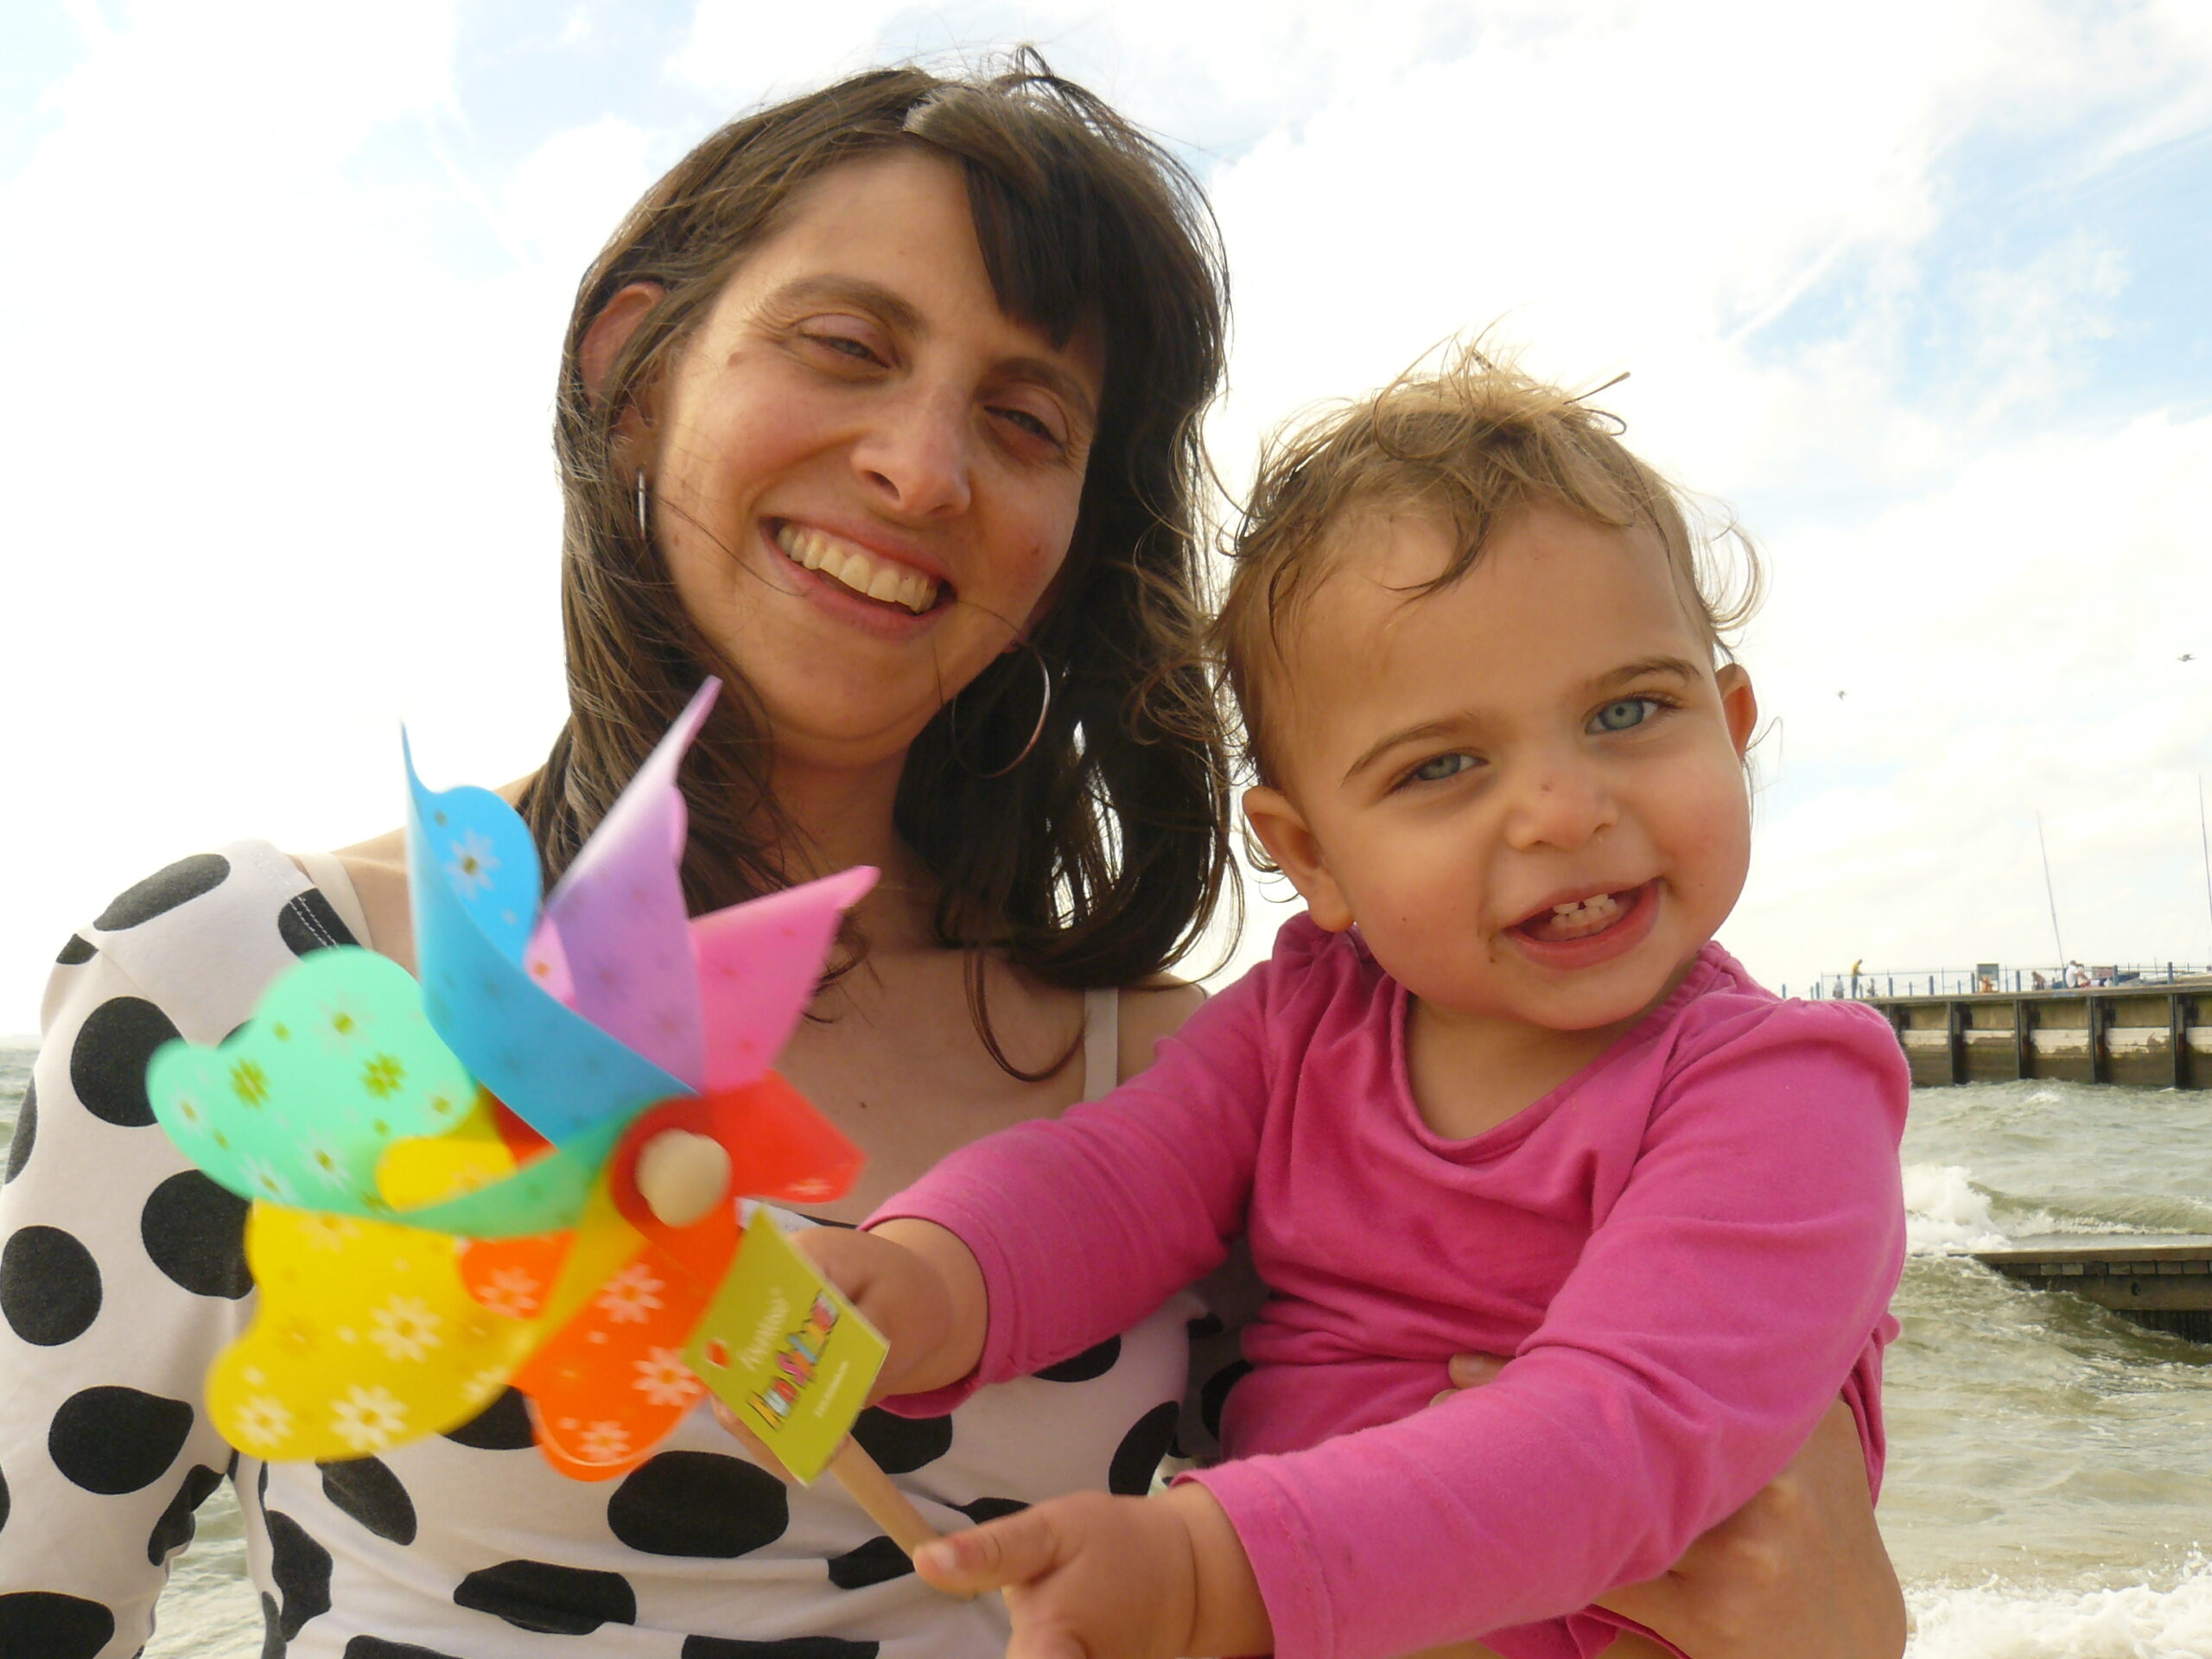 Julia and her young daughter smile for the camera. They are at the seaside and the child is holding a toy windmill.